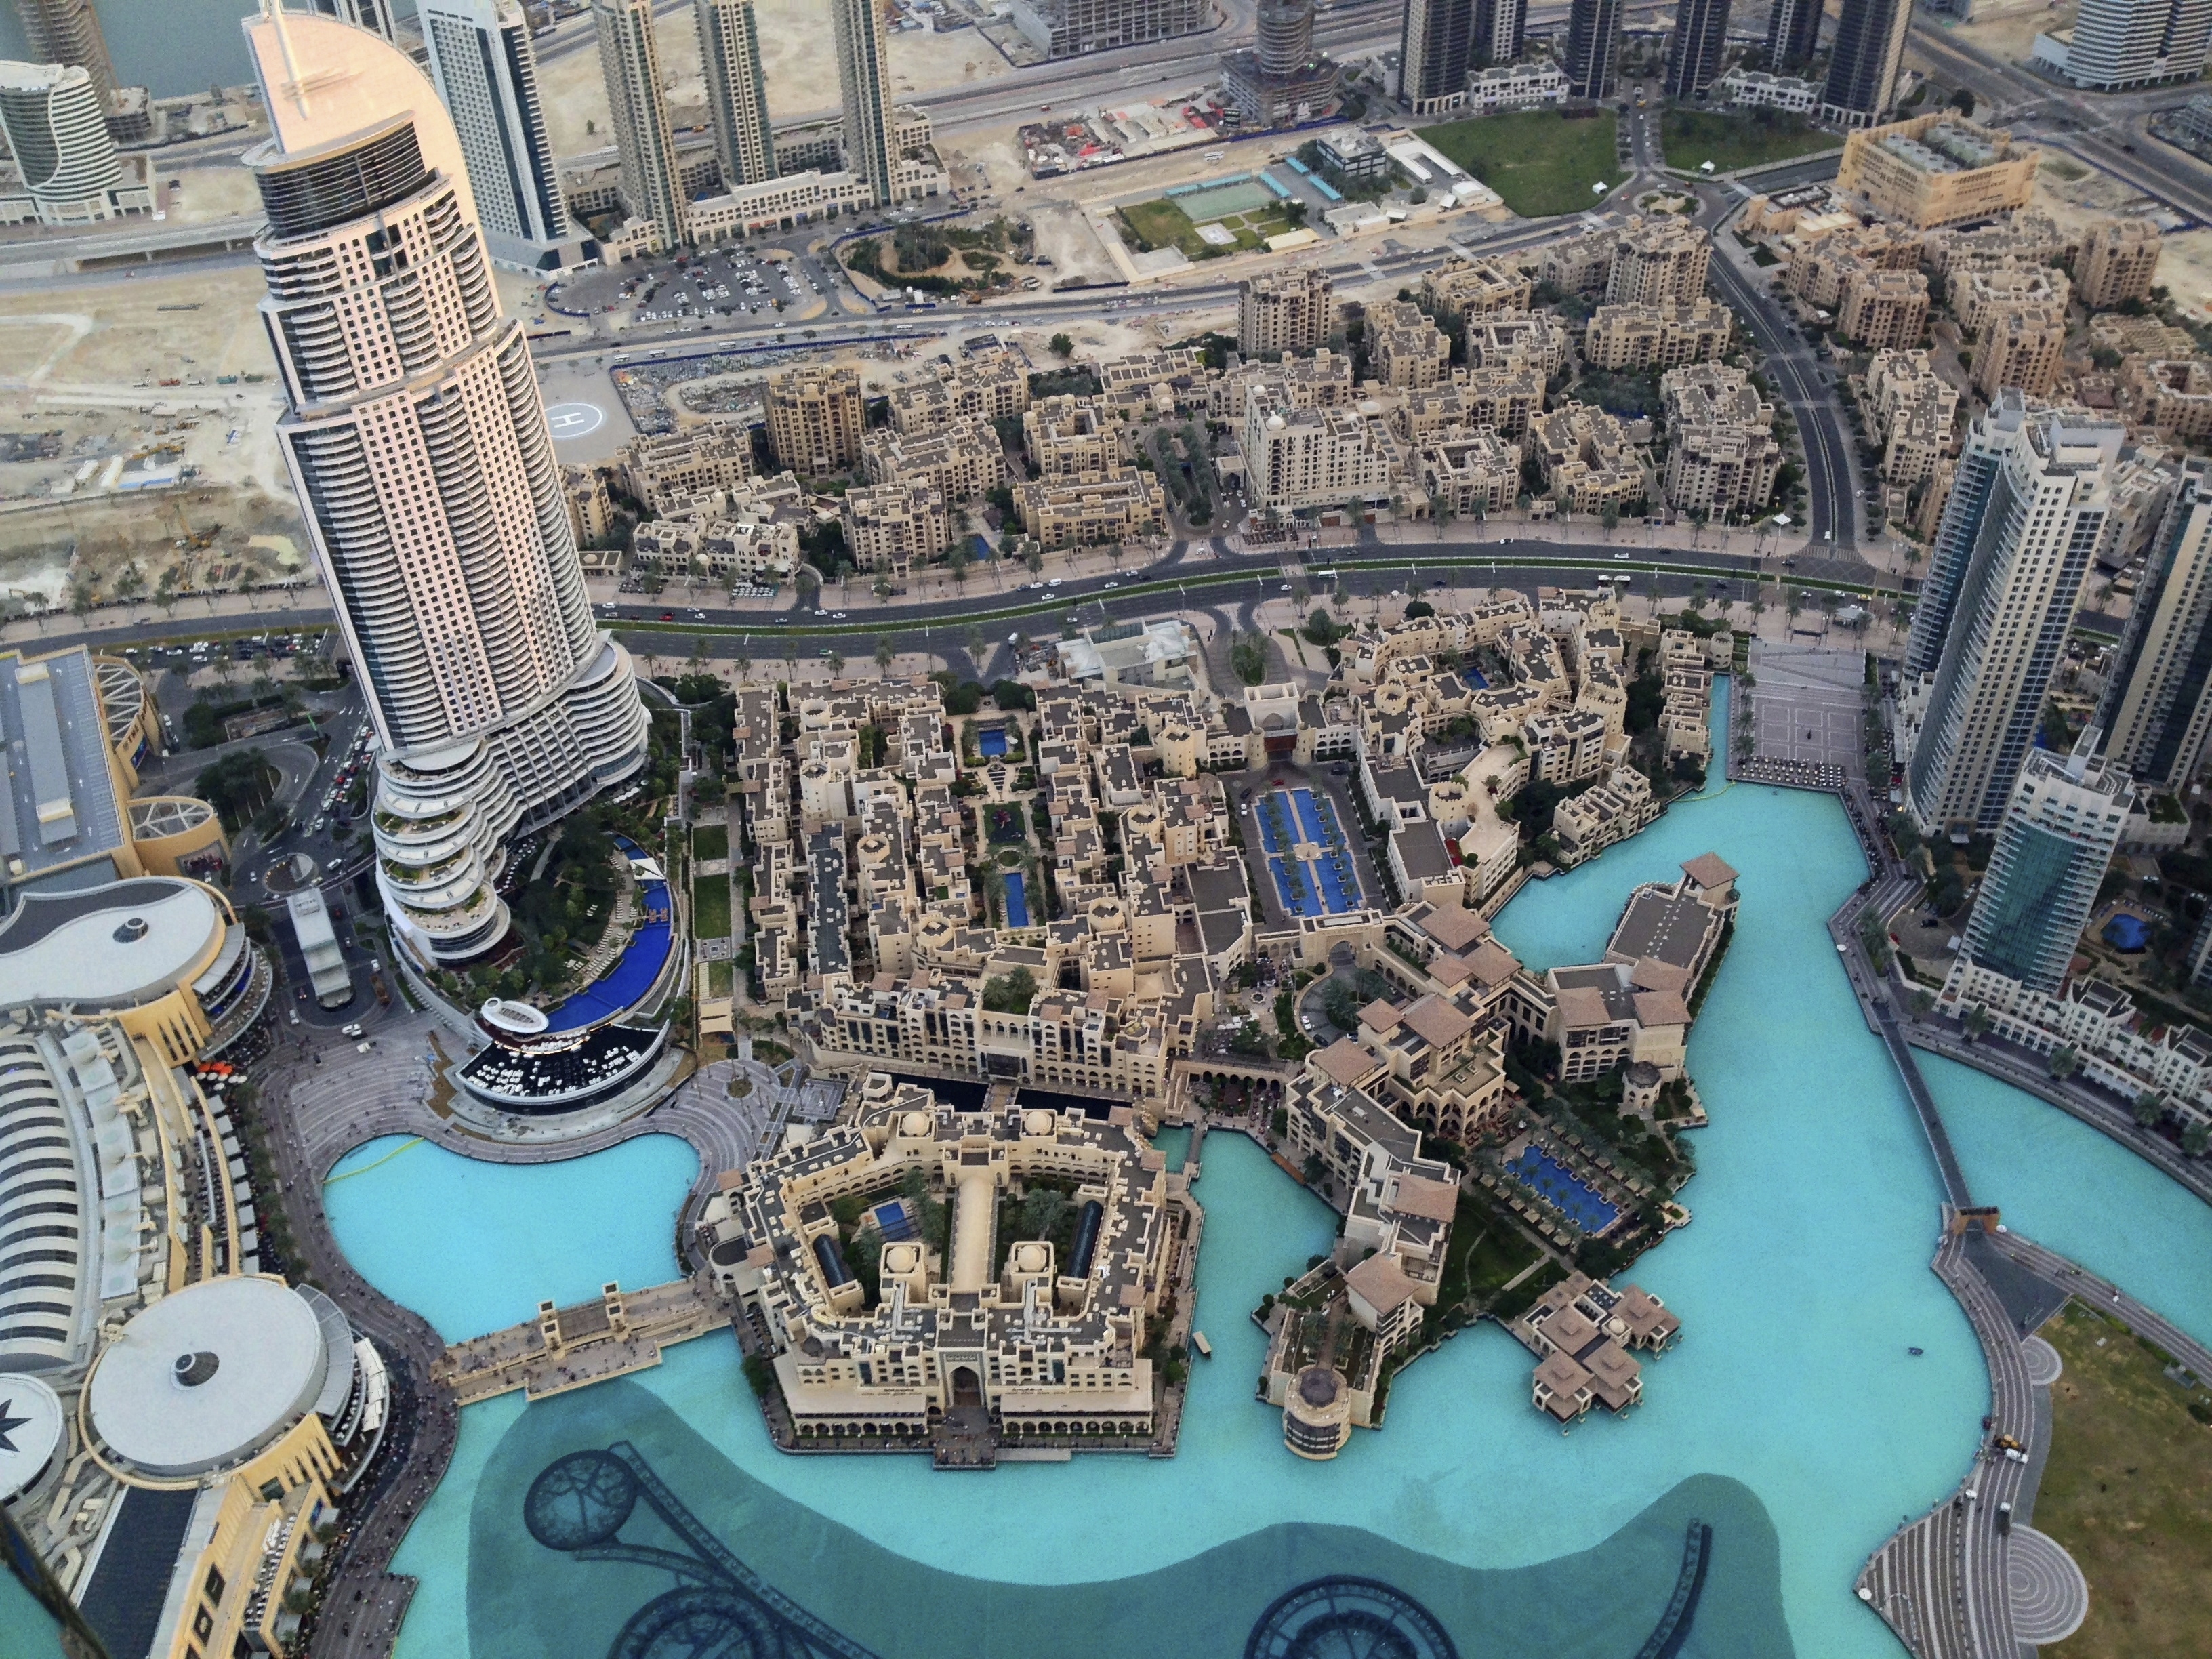 Top 15 Attractions And Things To Do In Dubai Skyscanners Travel Blog